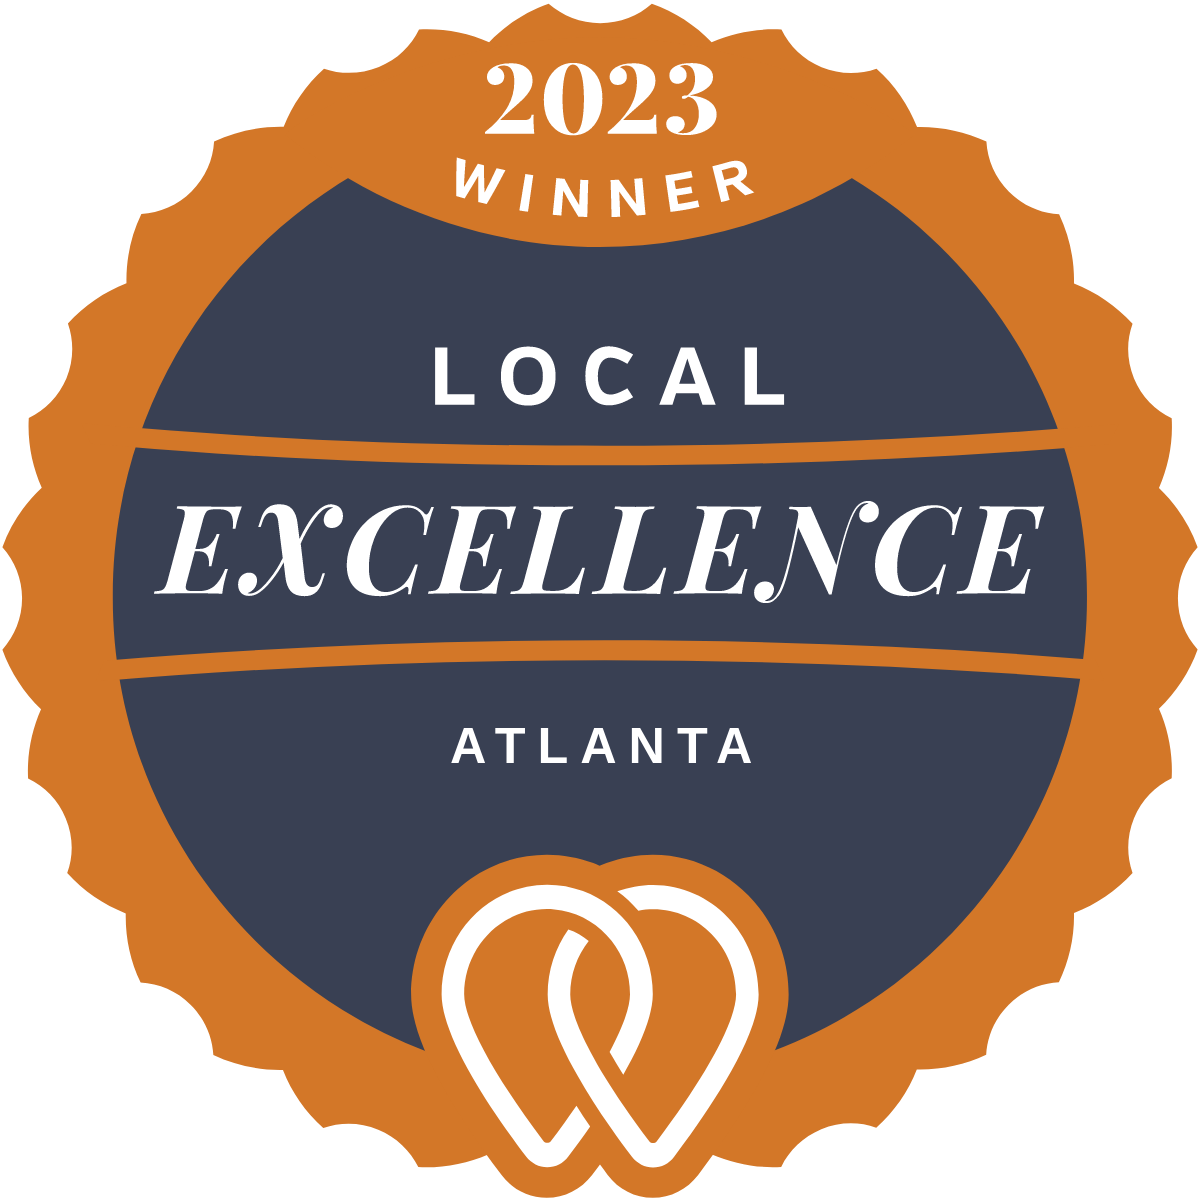 2023 Winner Local Excellence Atlanta | UpCity Awards | Clementine Creative Agency